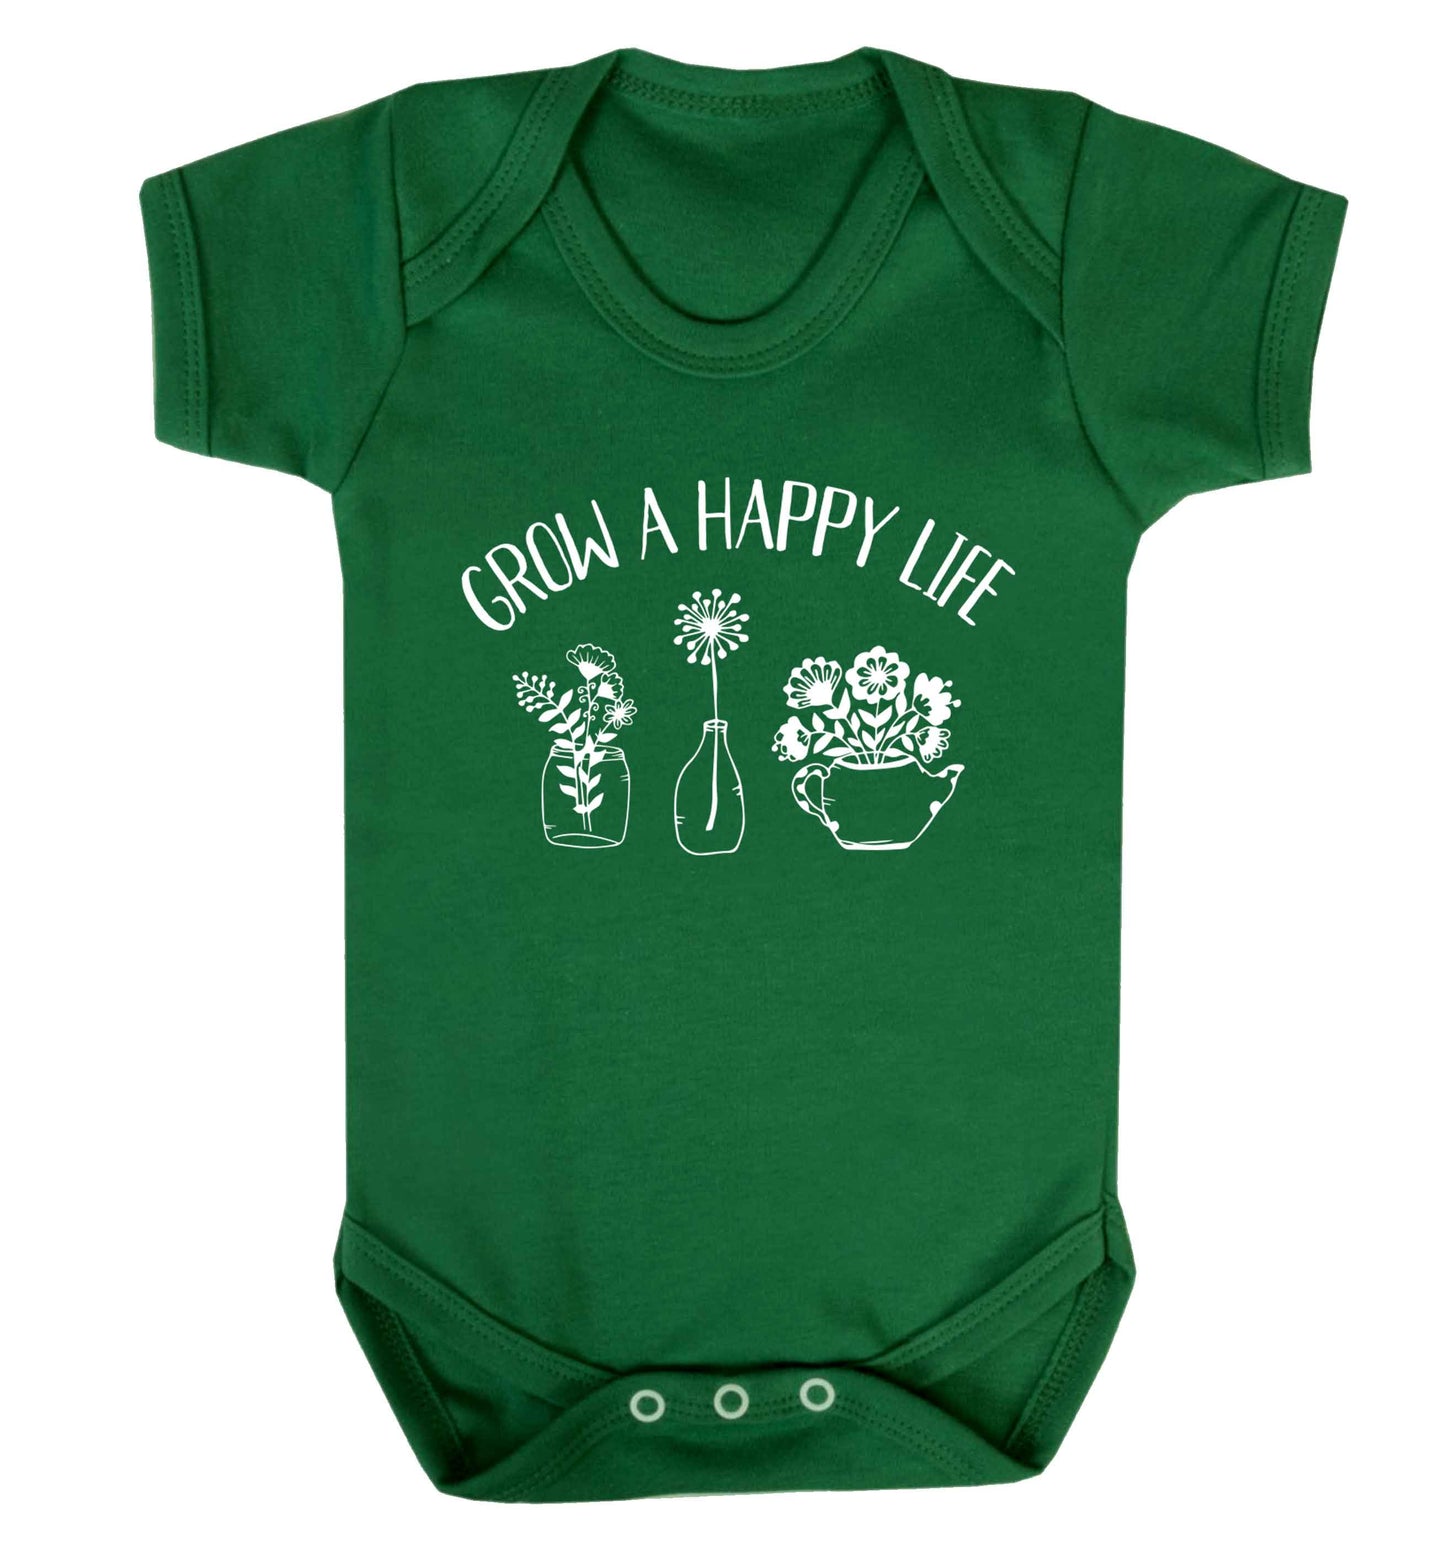 Grow a happy life Baby Vest green 18-24 months